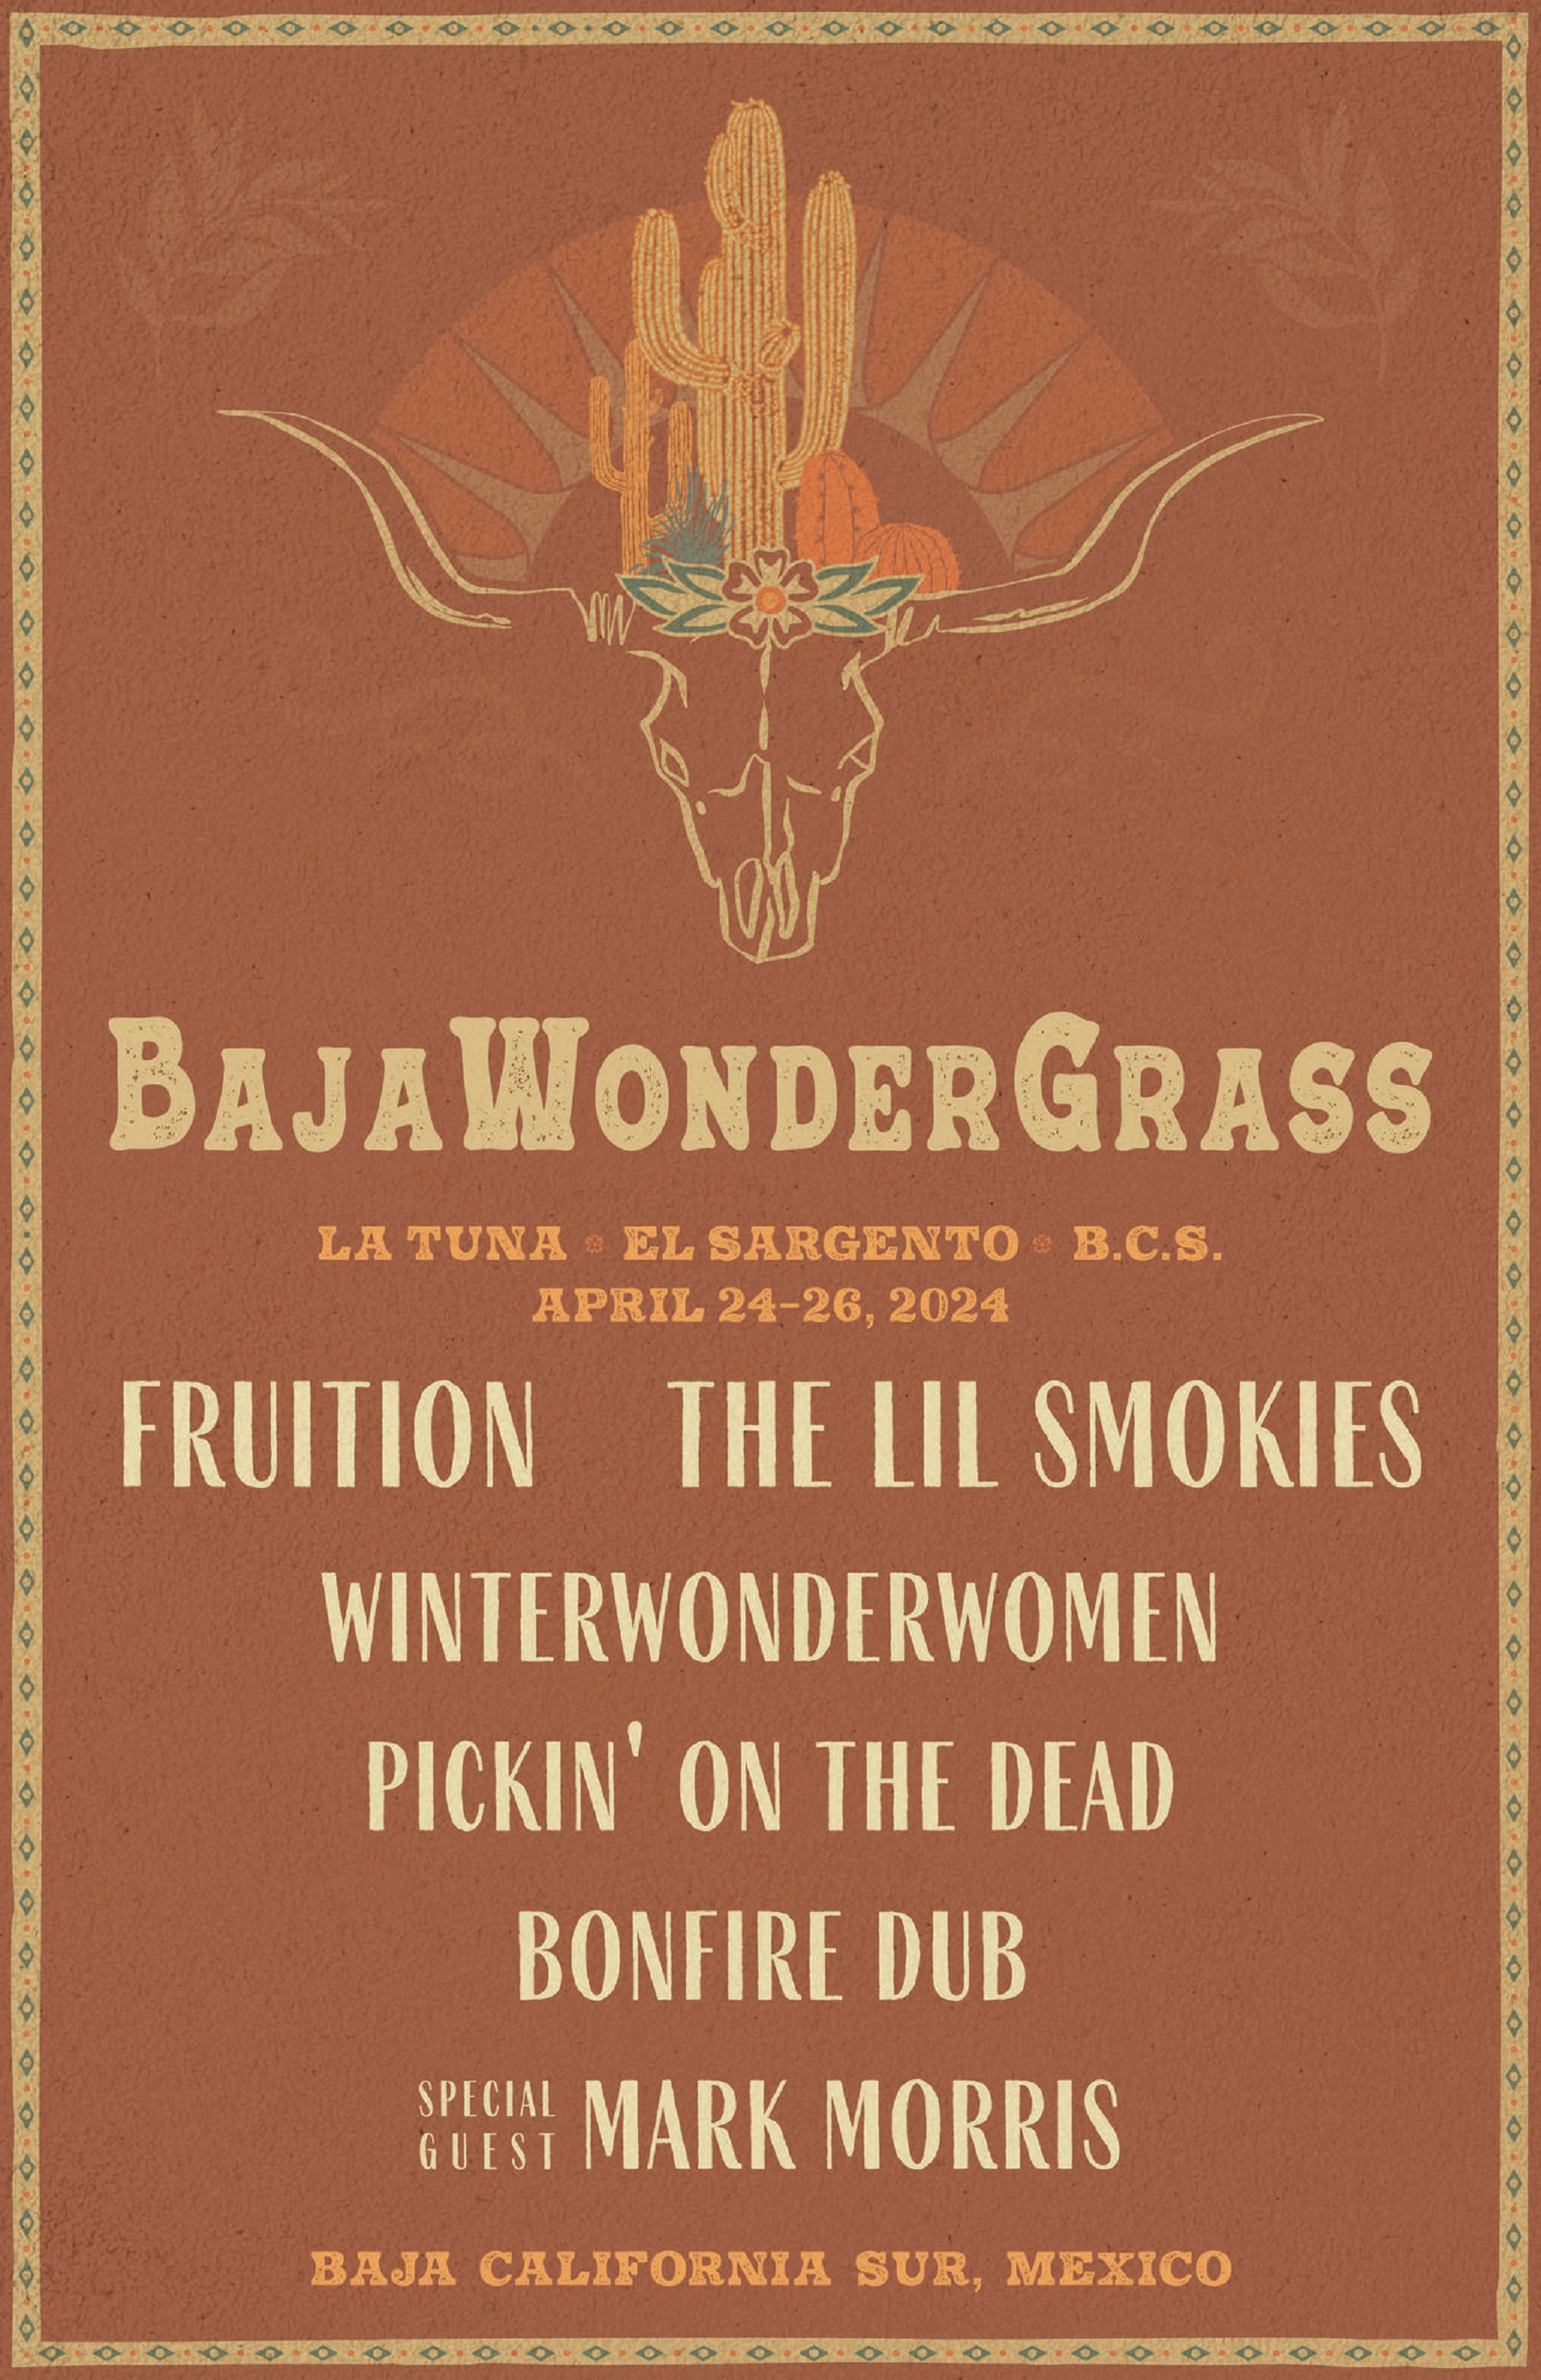 BajaWonderGrass Festival To Feature Fruition, The Lil Smokies and More April 24-26 in Baja California Sur